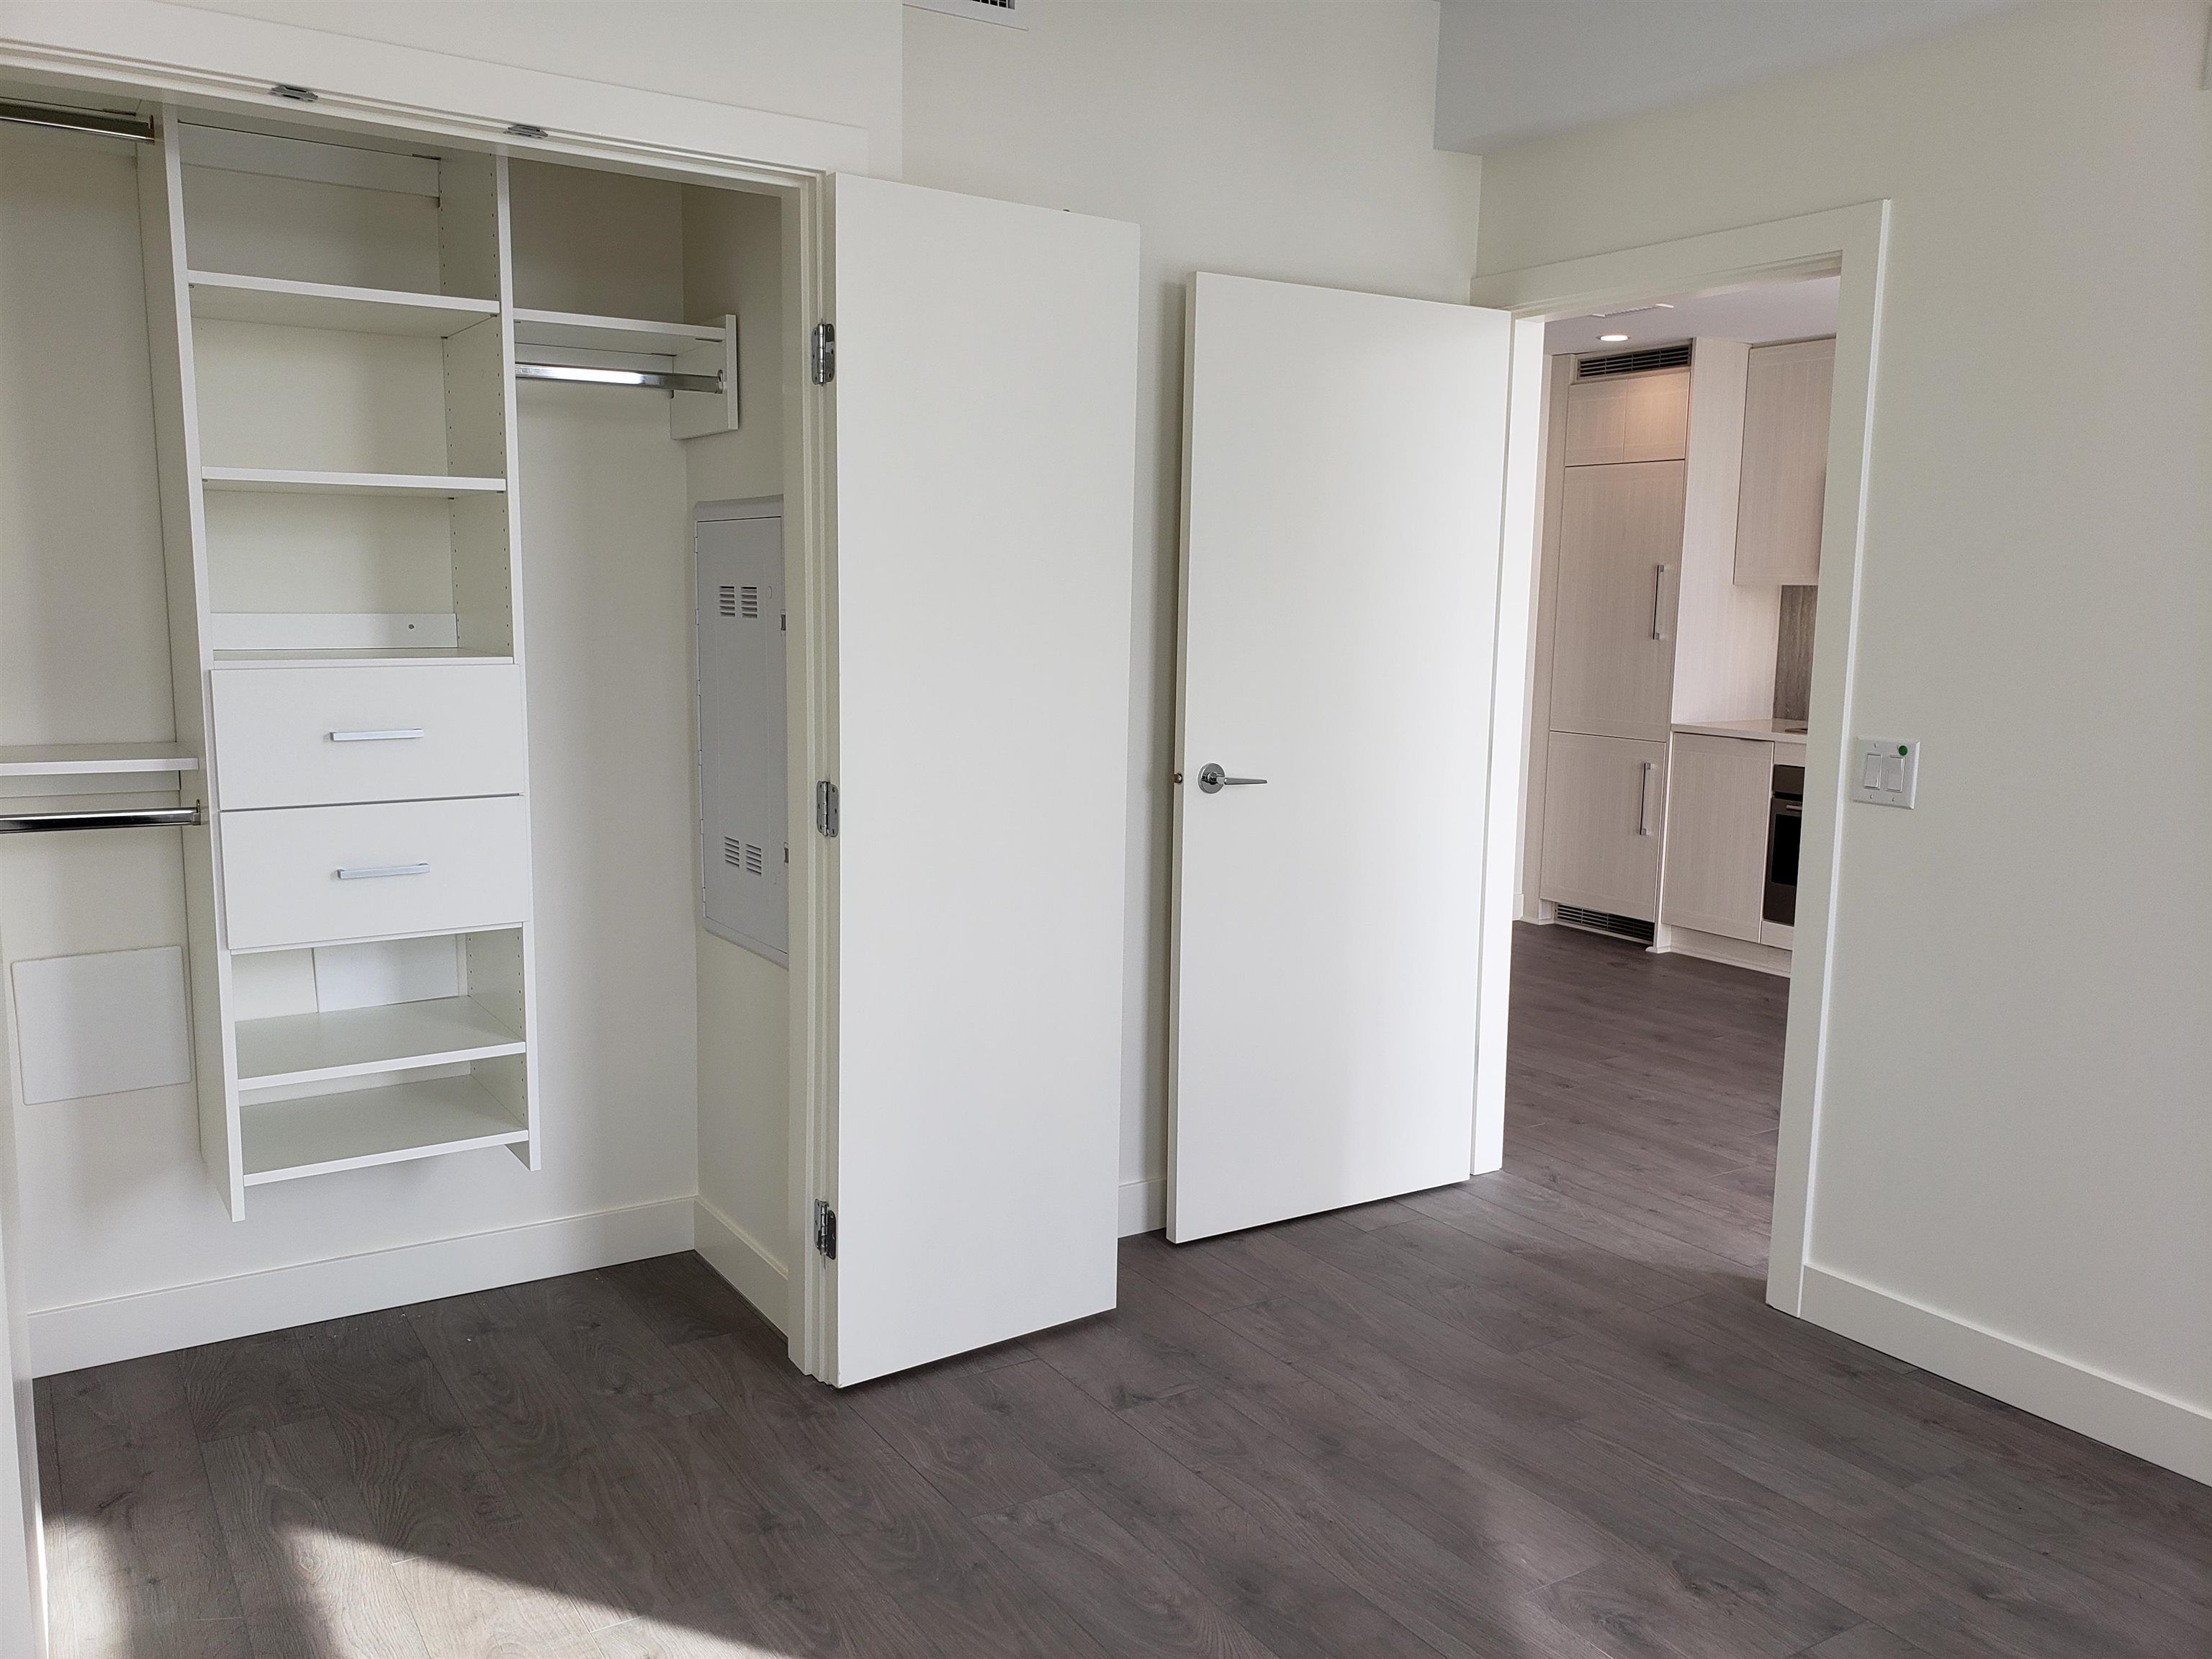 Photo 10: Photos: 506 5051 IMPERIAL STREET in Burnaby: Metrotown Condo for sale (Burnaby South)  : MLS®# R2626977